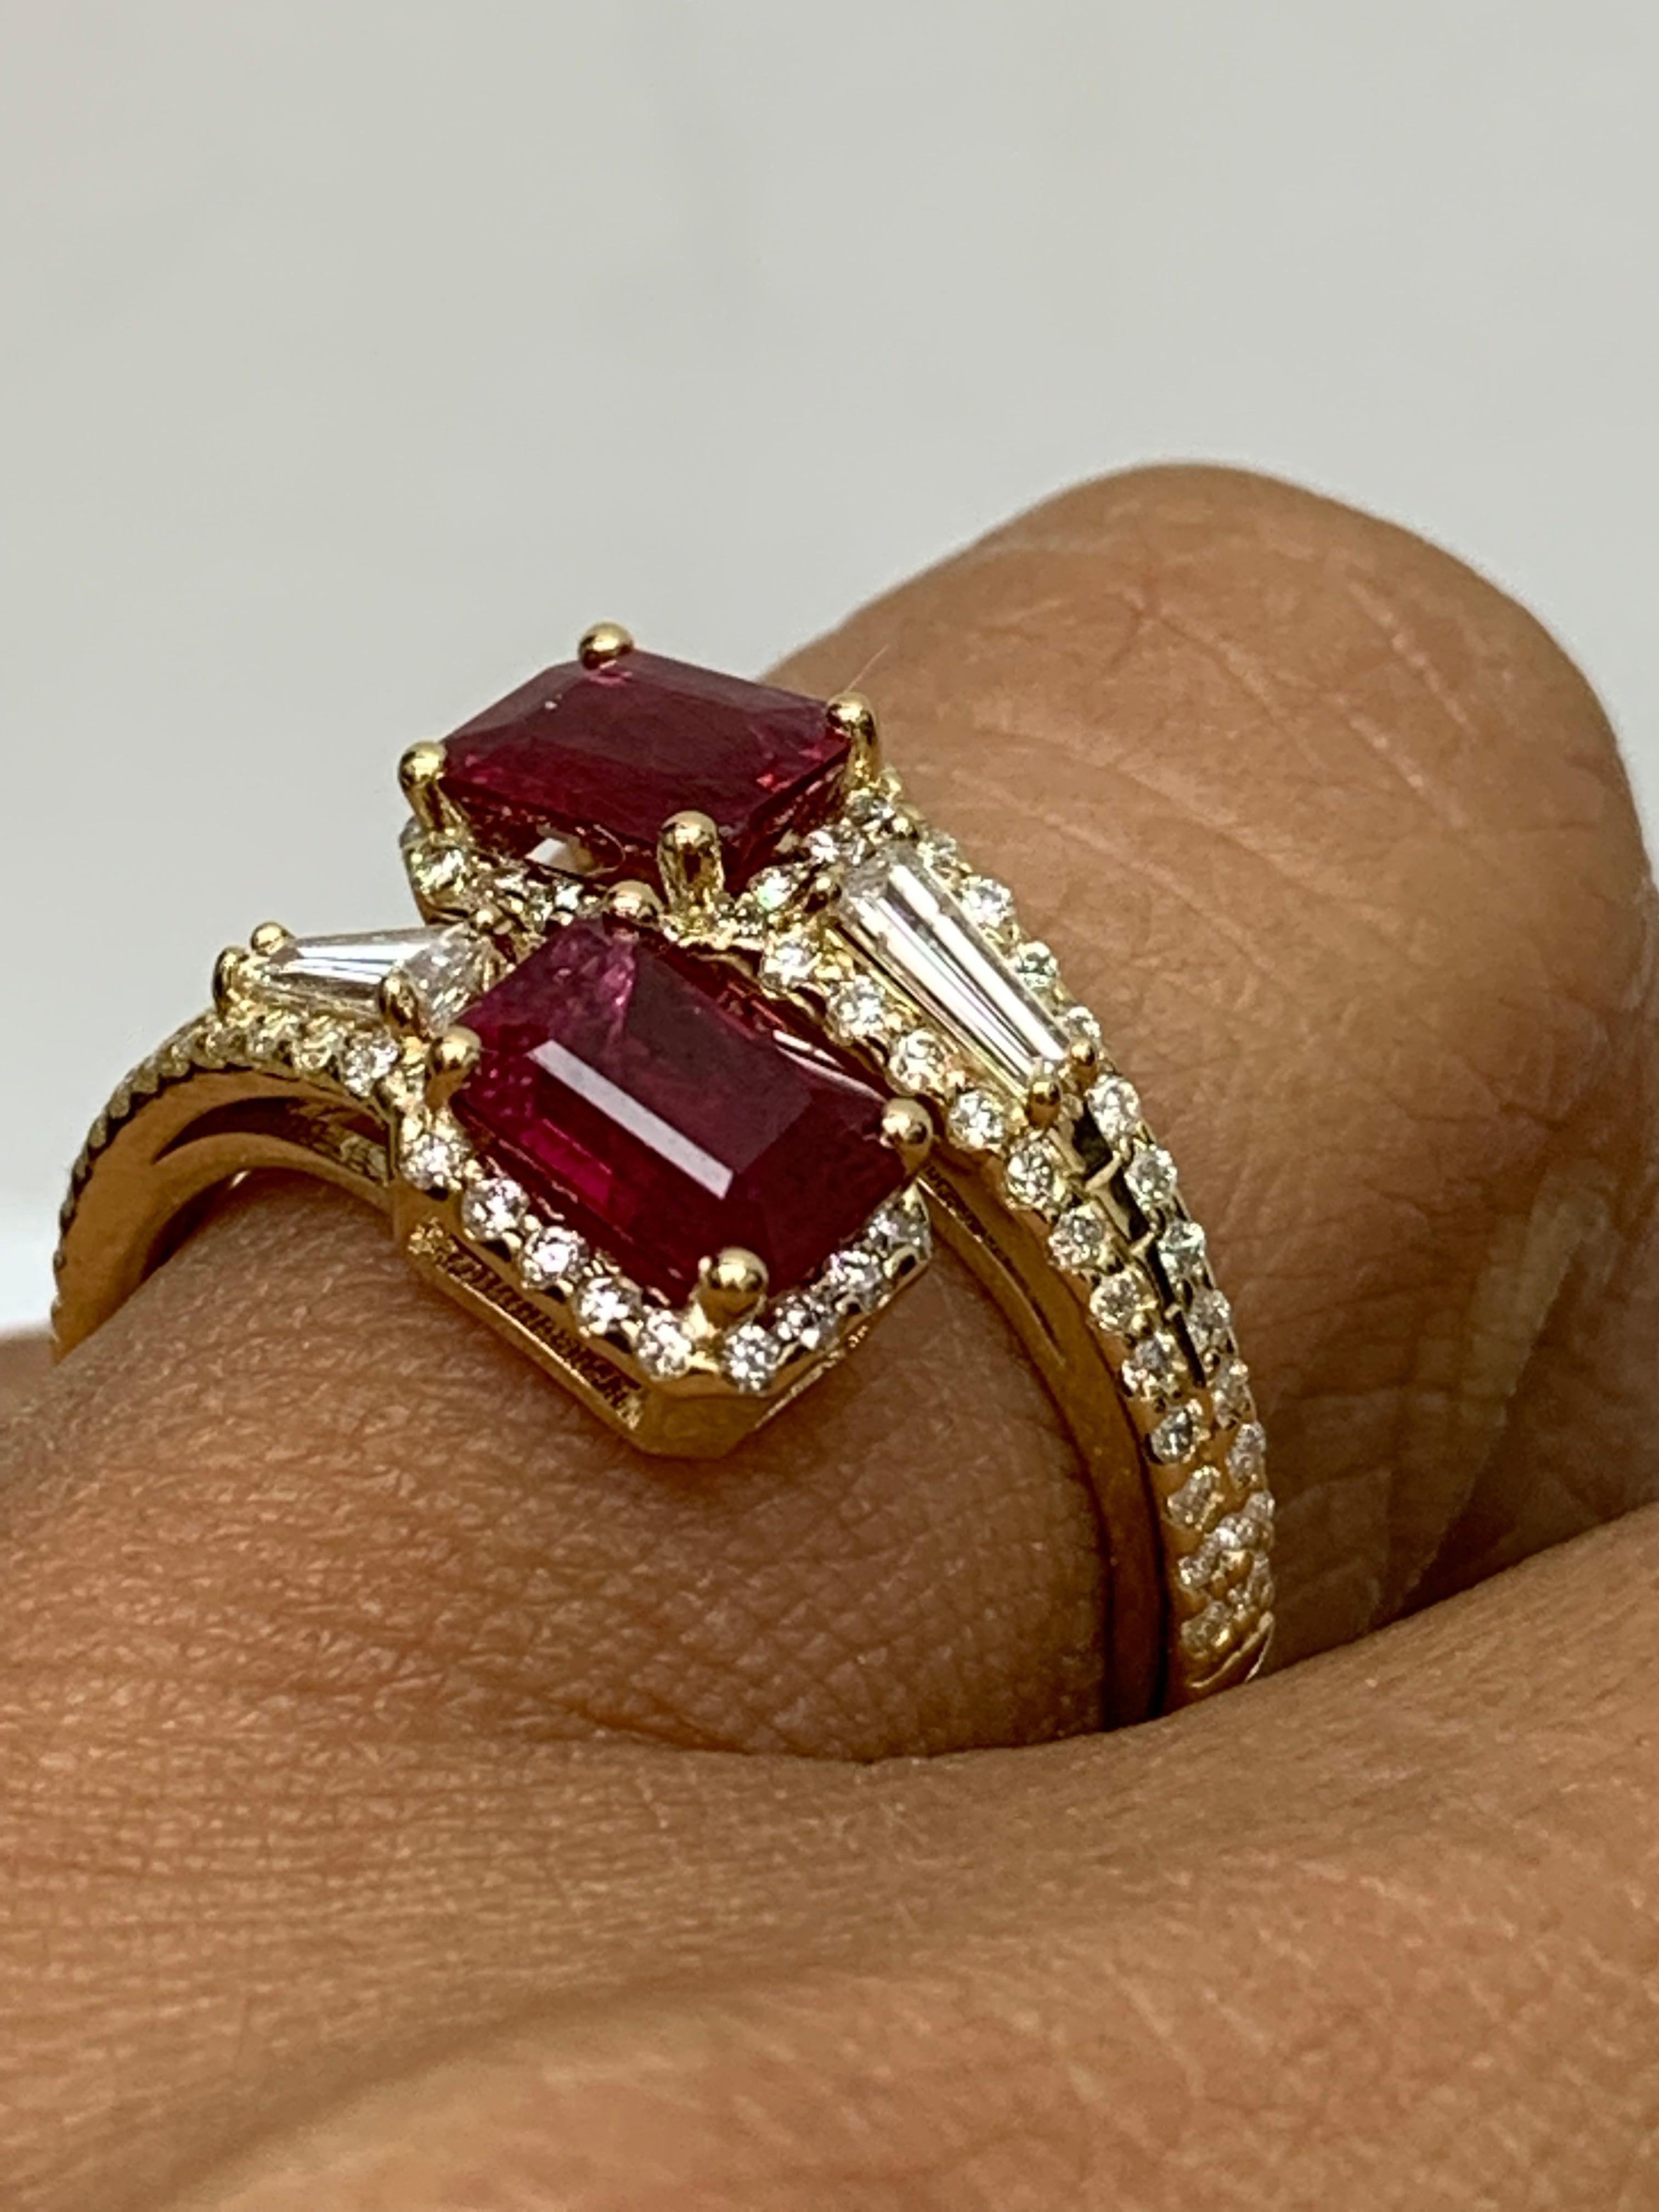 2.18 Carat Emerald Cut Ruby Diamond Toi et Moi Engagement Ring 14K Yellow Gold For Sale 2